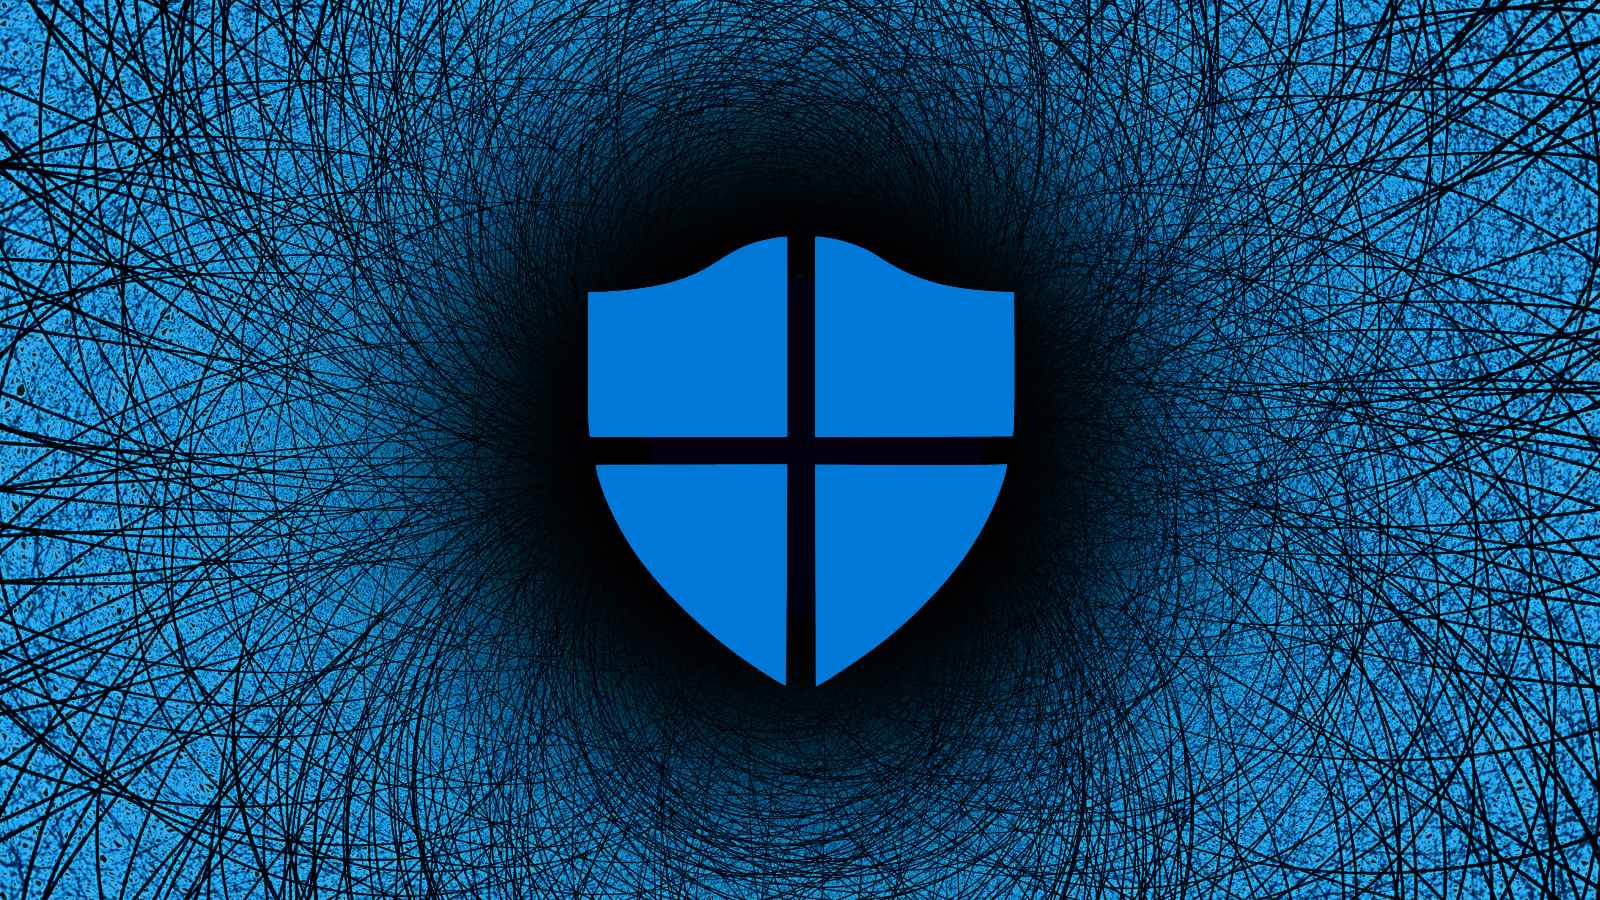 Microsoft Defender adds command and control traffic detection